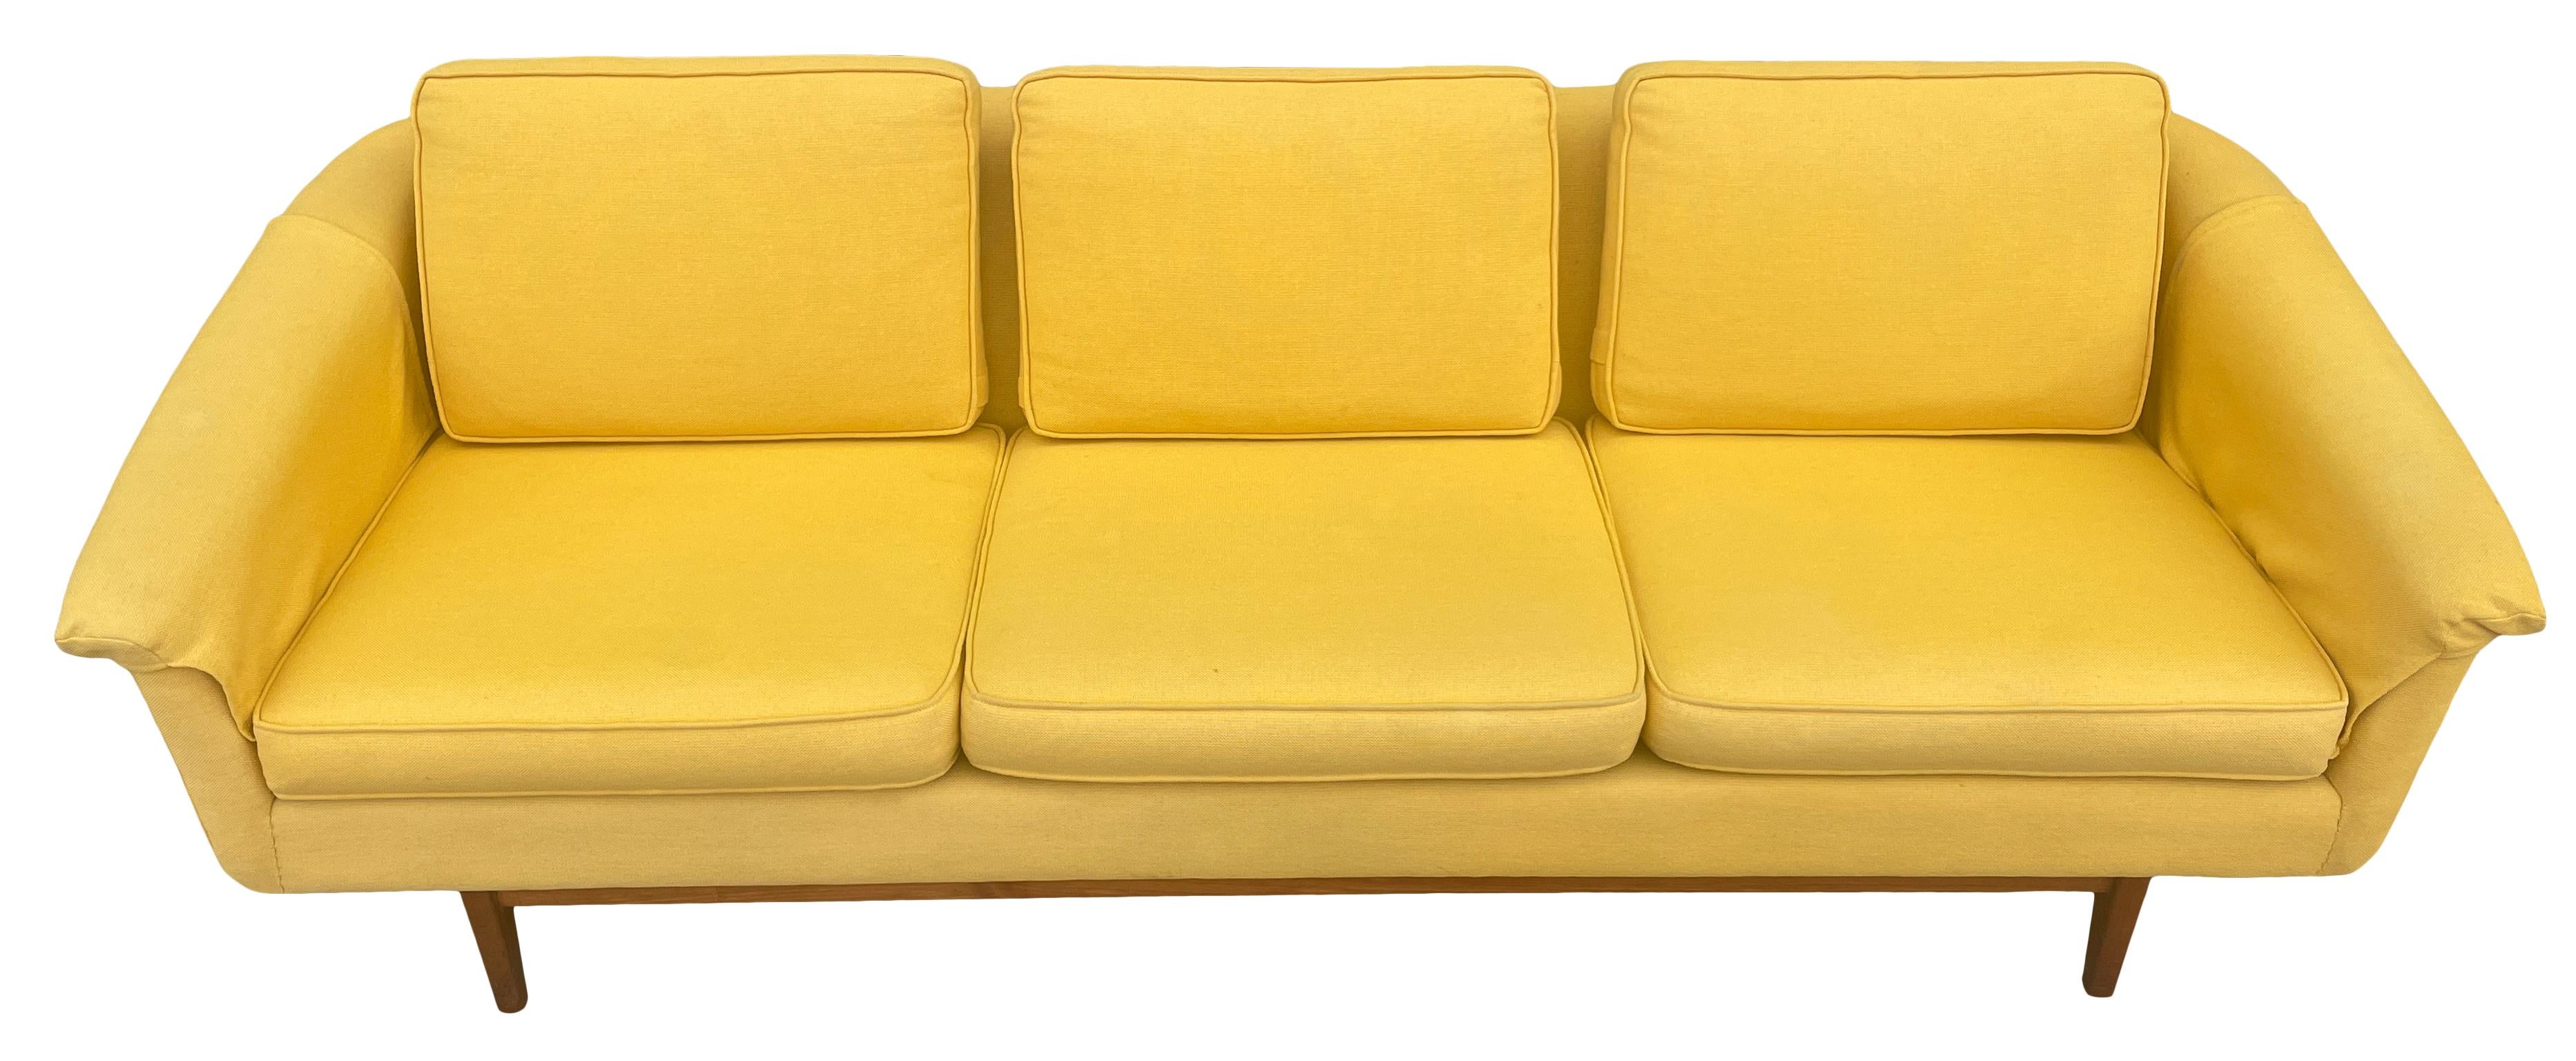 Mid-Century Modern 3 seat low Scandinavian sofa couch by DUX in mustard yellow with teak base. All Original woven Upholstery in beautiful condition. Has 2 extra small pillows and arm covers. Wonderful design and very comfortable. Show little wear